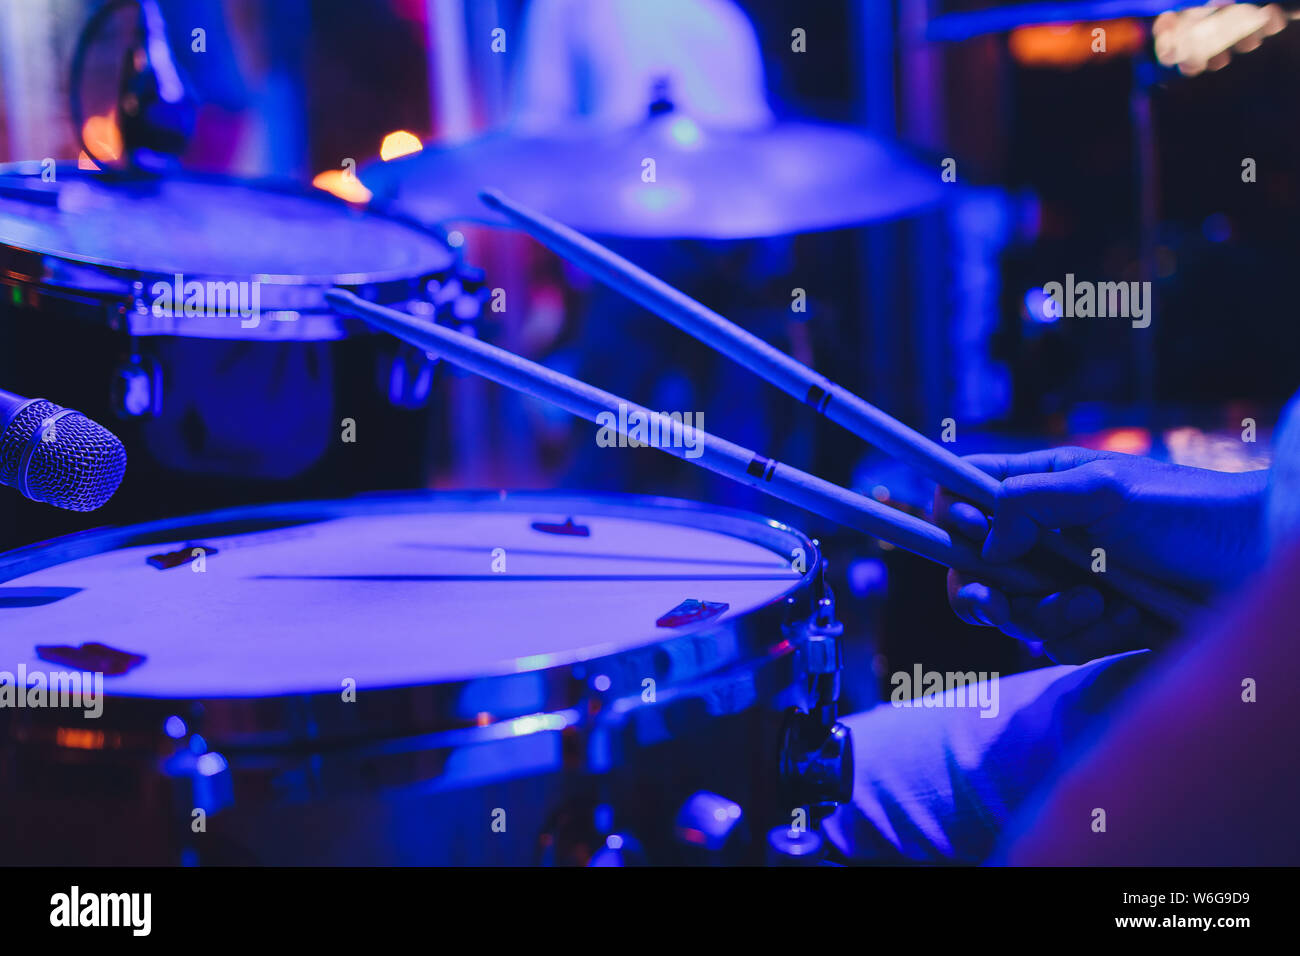 Drum kit on stage in the spotlight color. Stock Photo